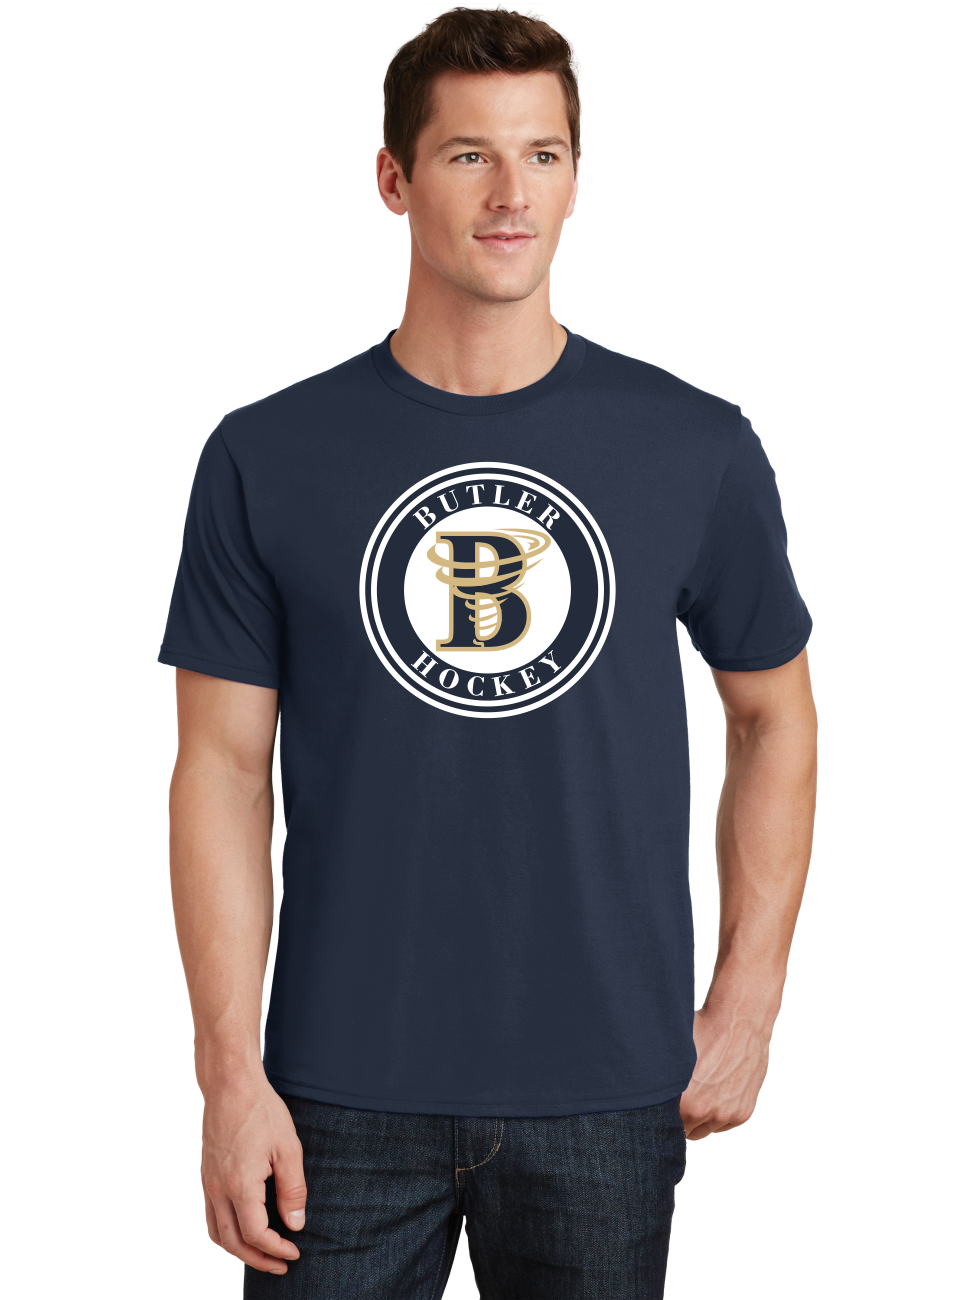 Logo T-Shirt - Butler - Multiple Colors Available